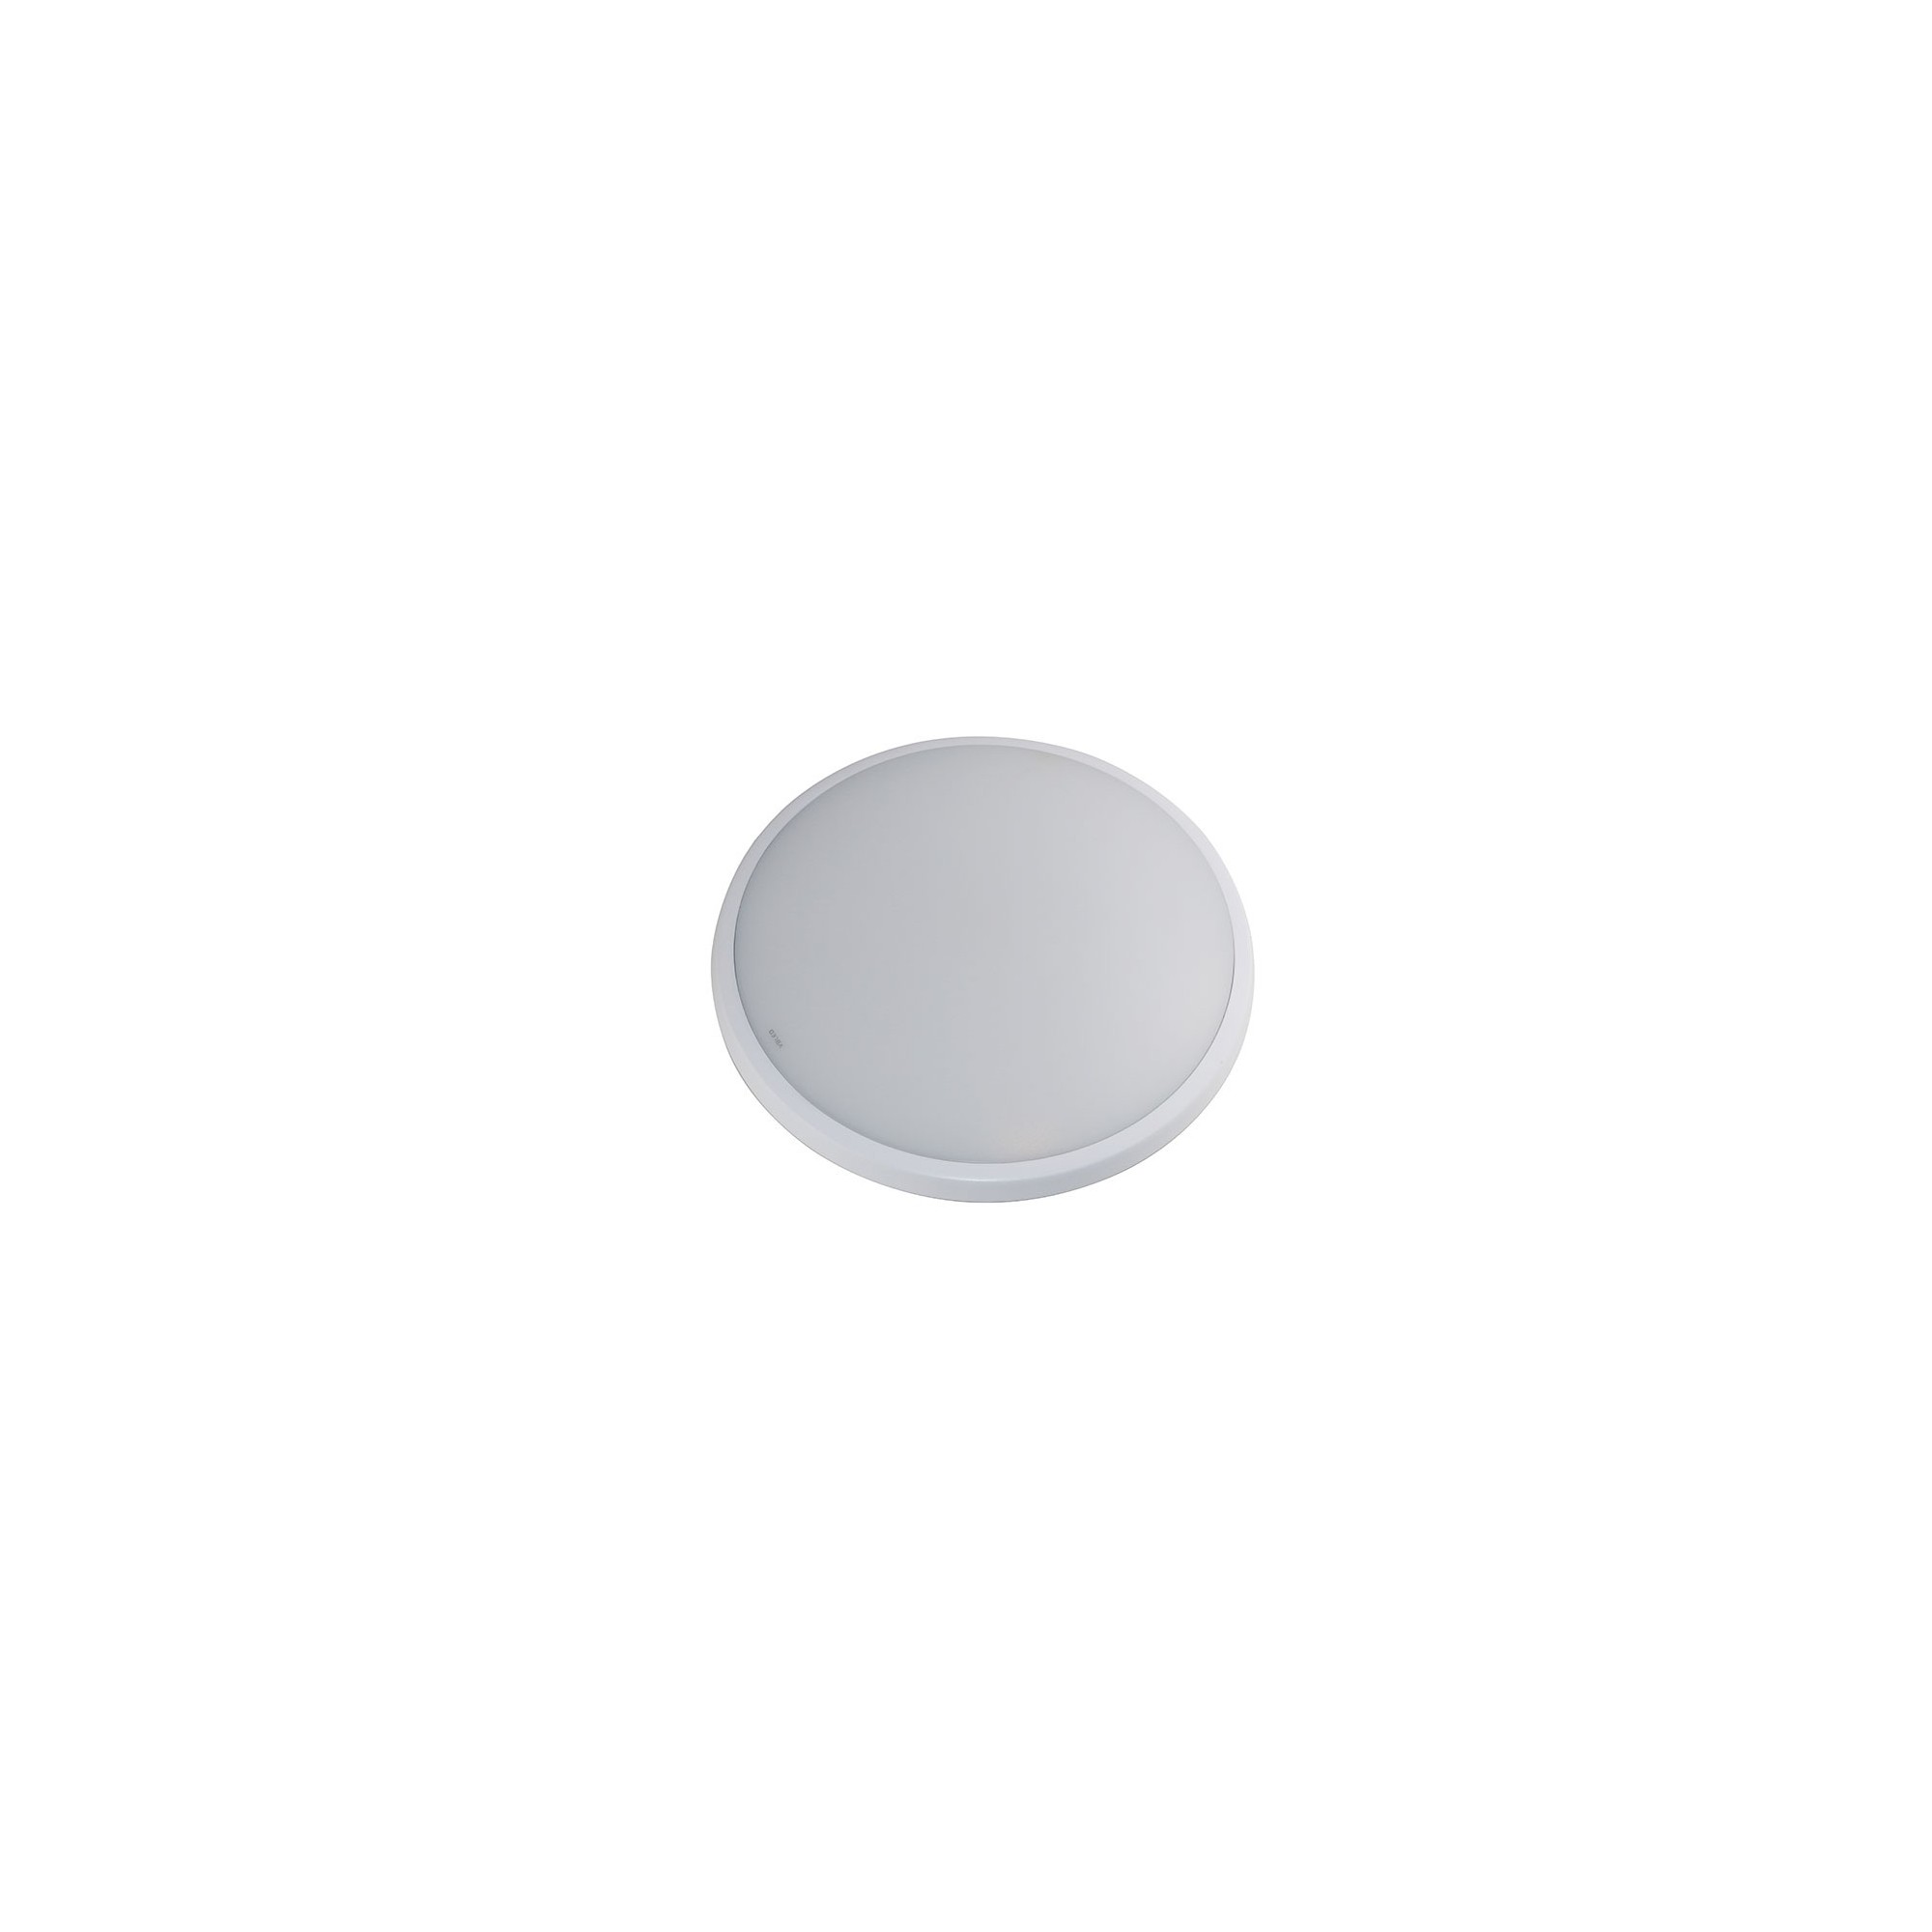 VBLED LED Ceiling Light "Classico" 28W Dimmable